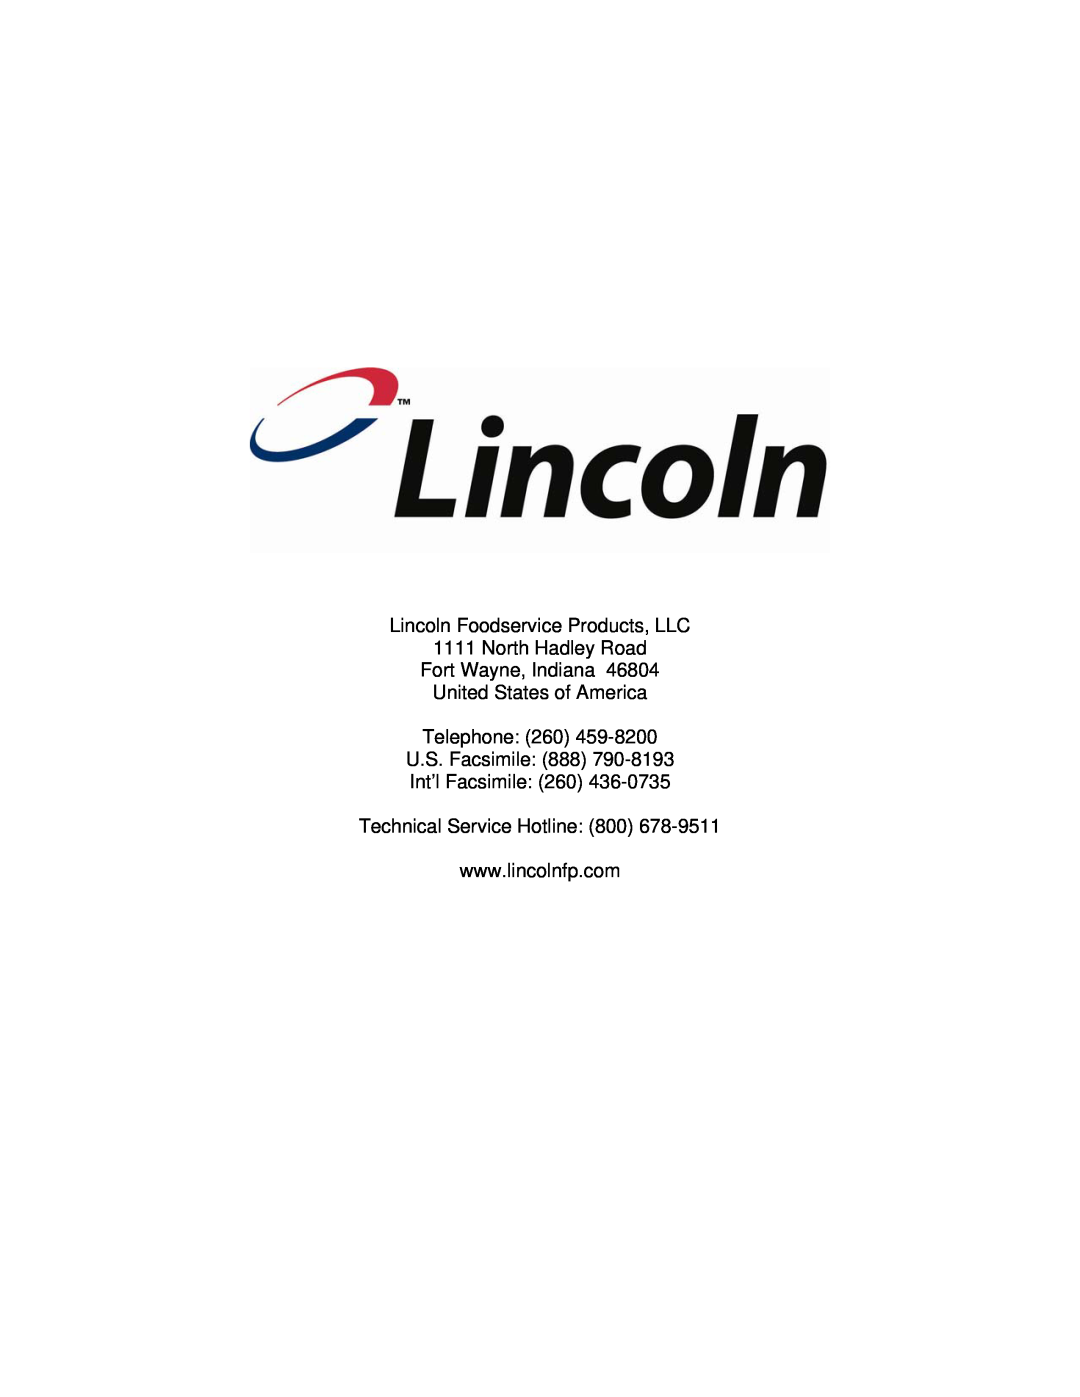 Lincoln 1457 Lincoln Foodservice Products, LLC, North Hadley Road Fort Wayne, Indiana, United States of America Telephone 